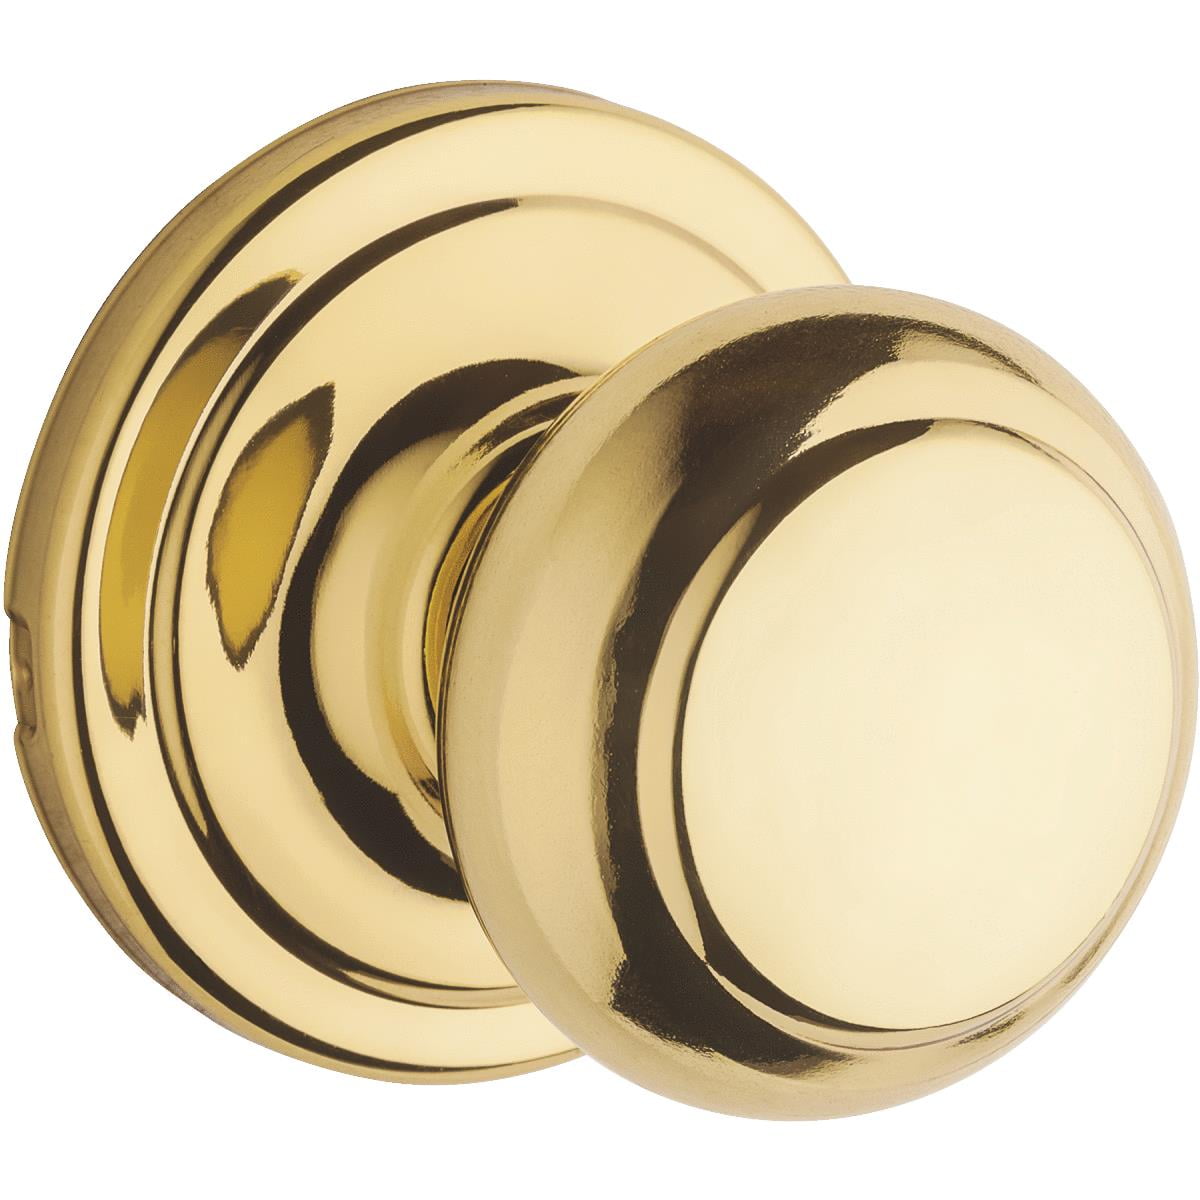 Weiser Welcome Home Polished Brass Hall And Closet Door Knob Ga101 T3 Ms